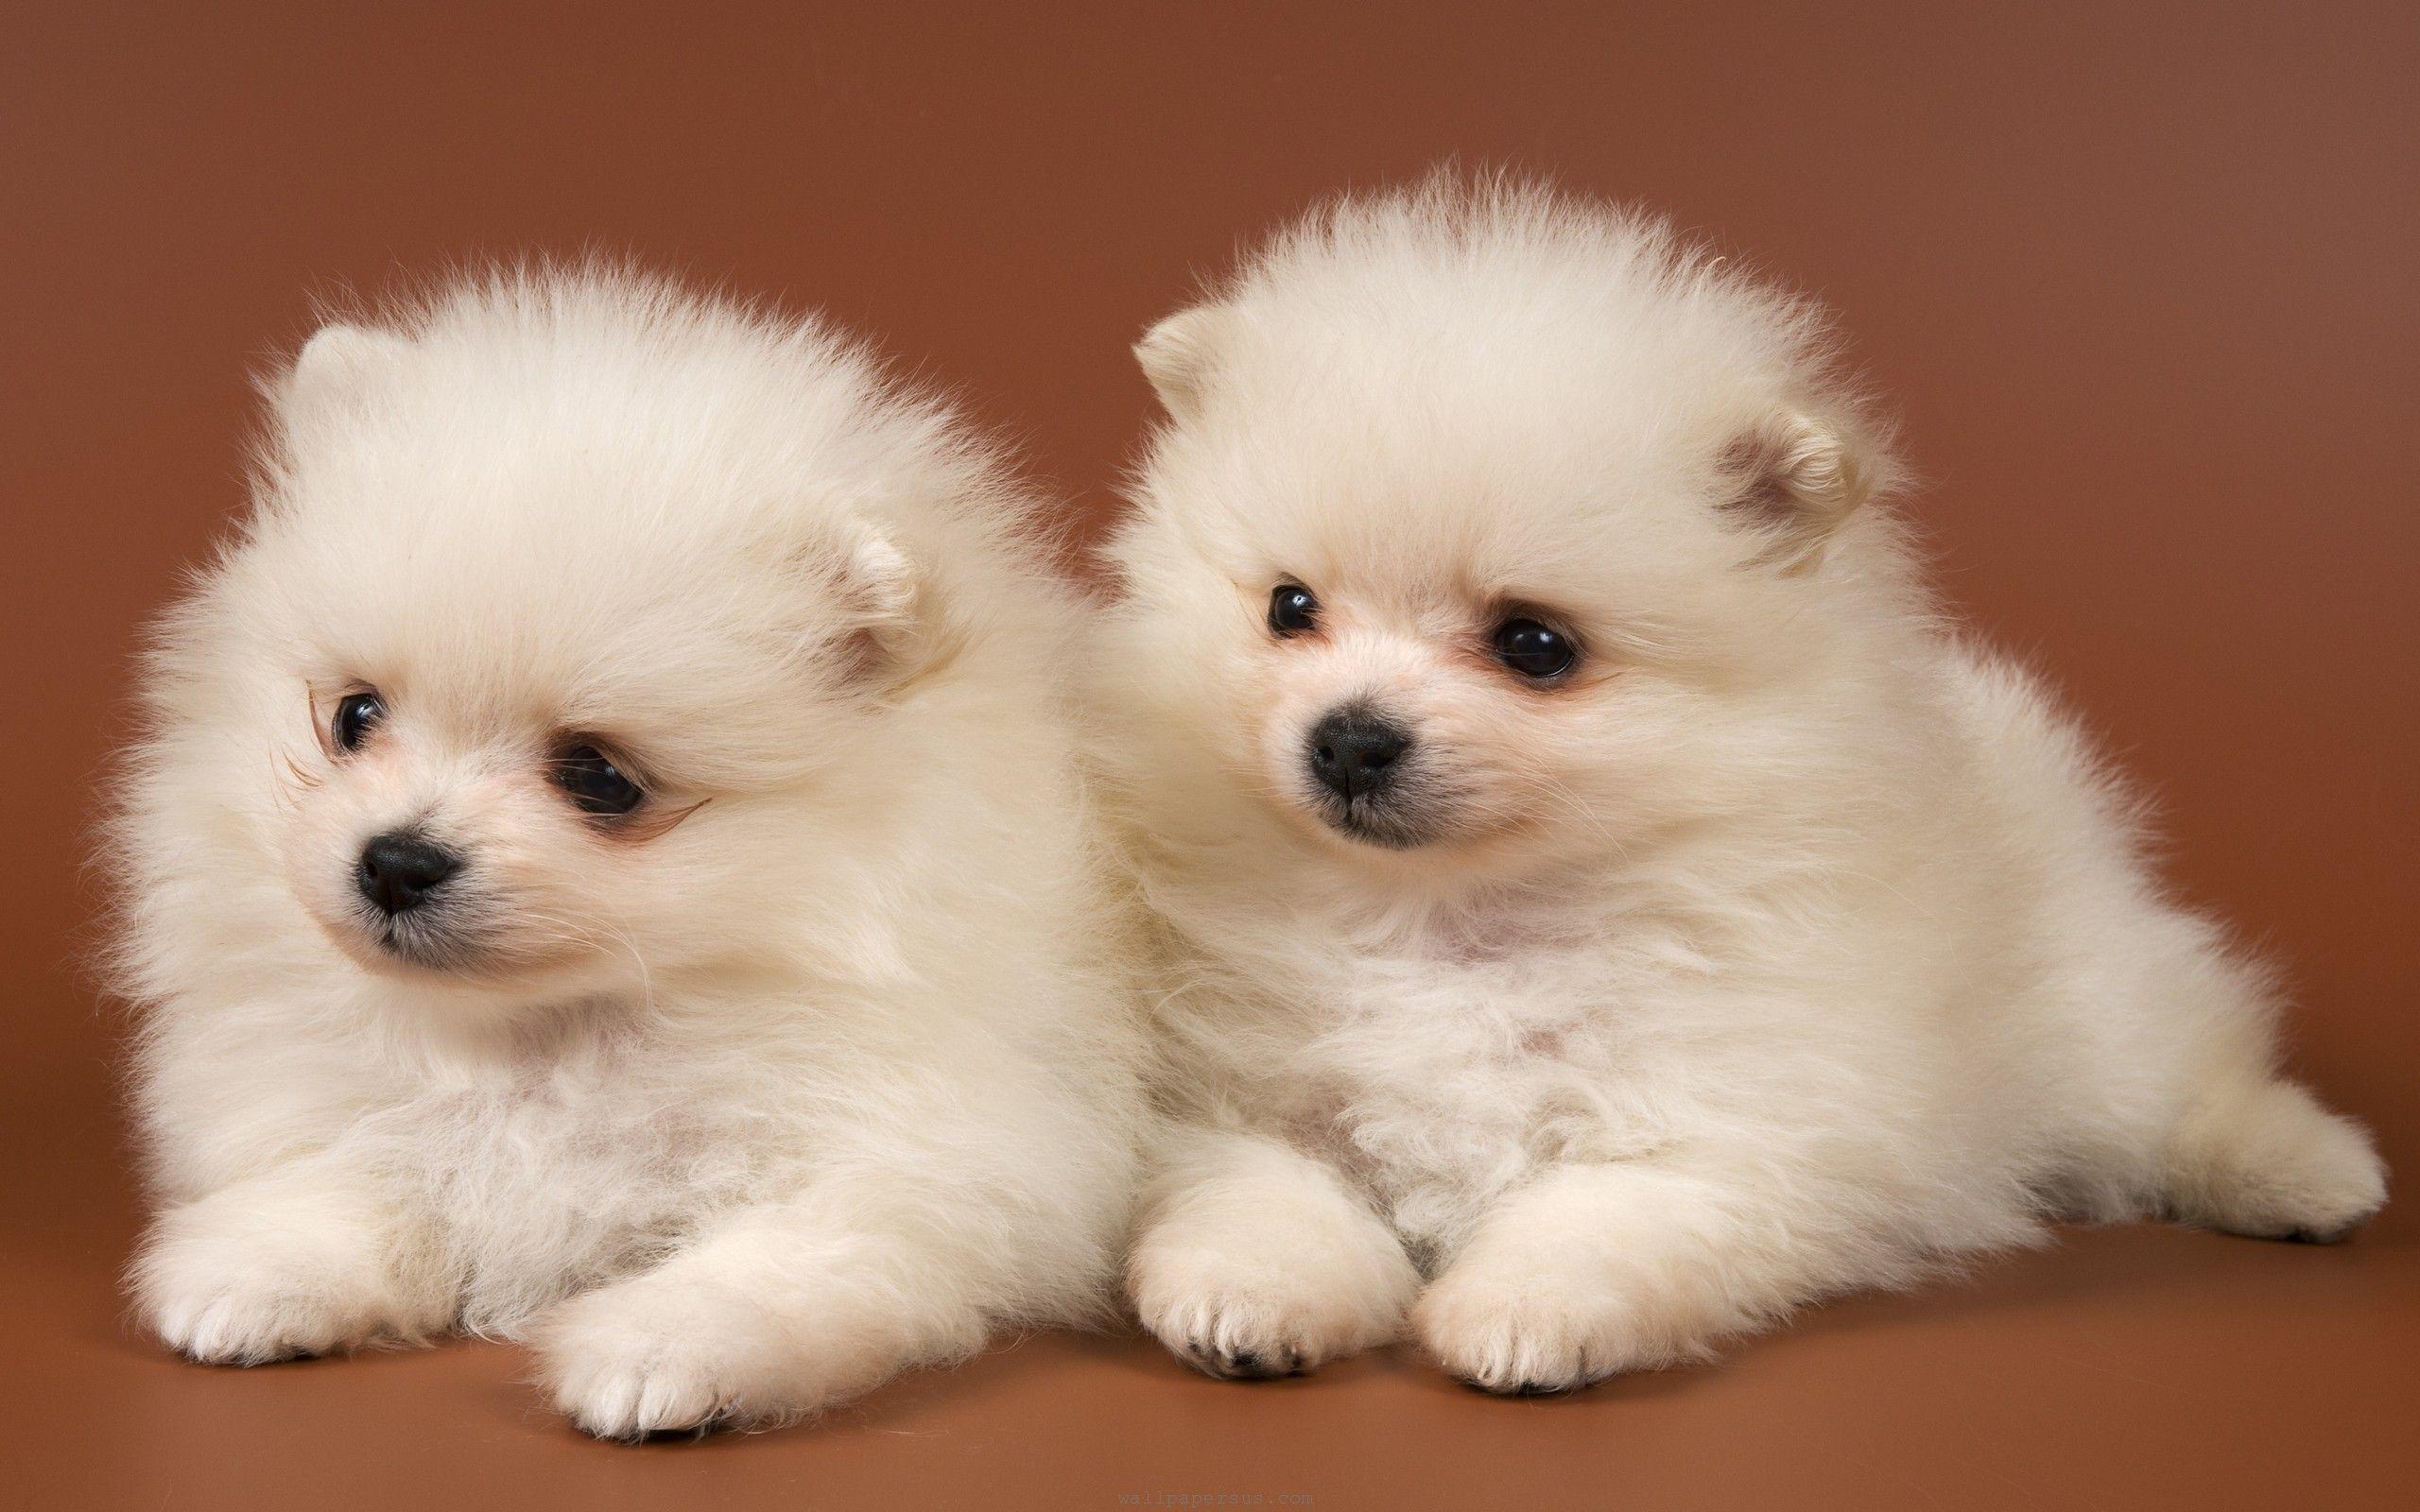 Dog Pets Baby Awesome Animal Dogs Pomeranian Puppies Puppy Adorable